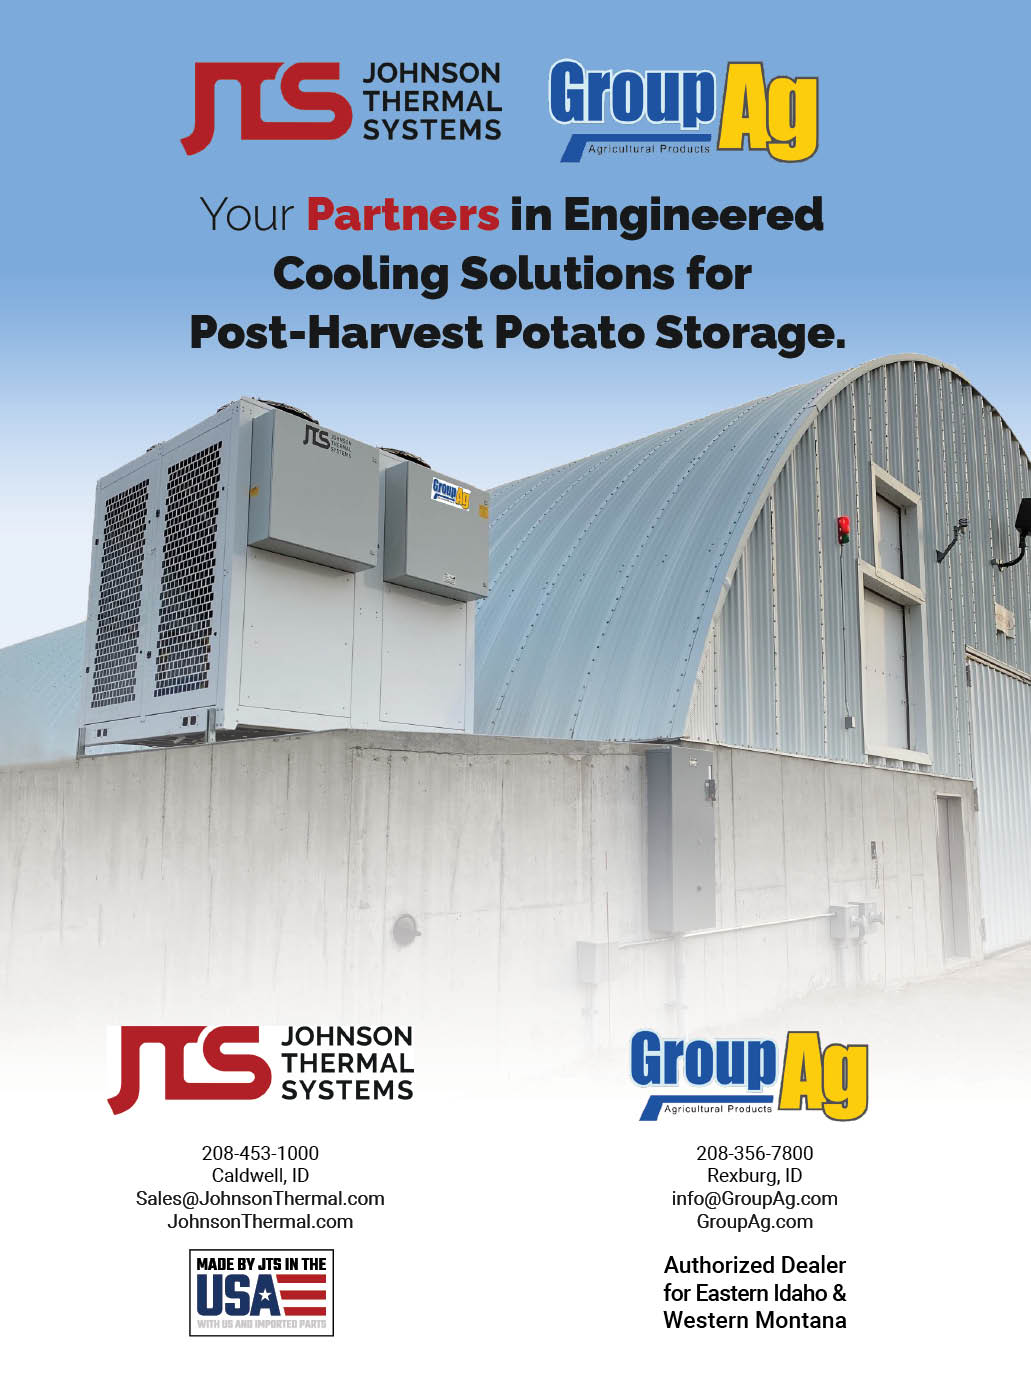 Johnson Thermal Systems and Group AG Advertisement